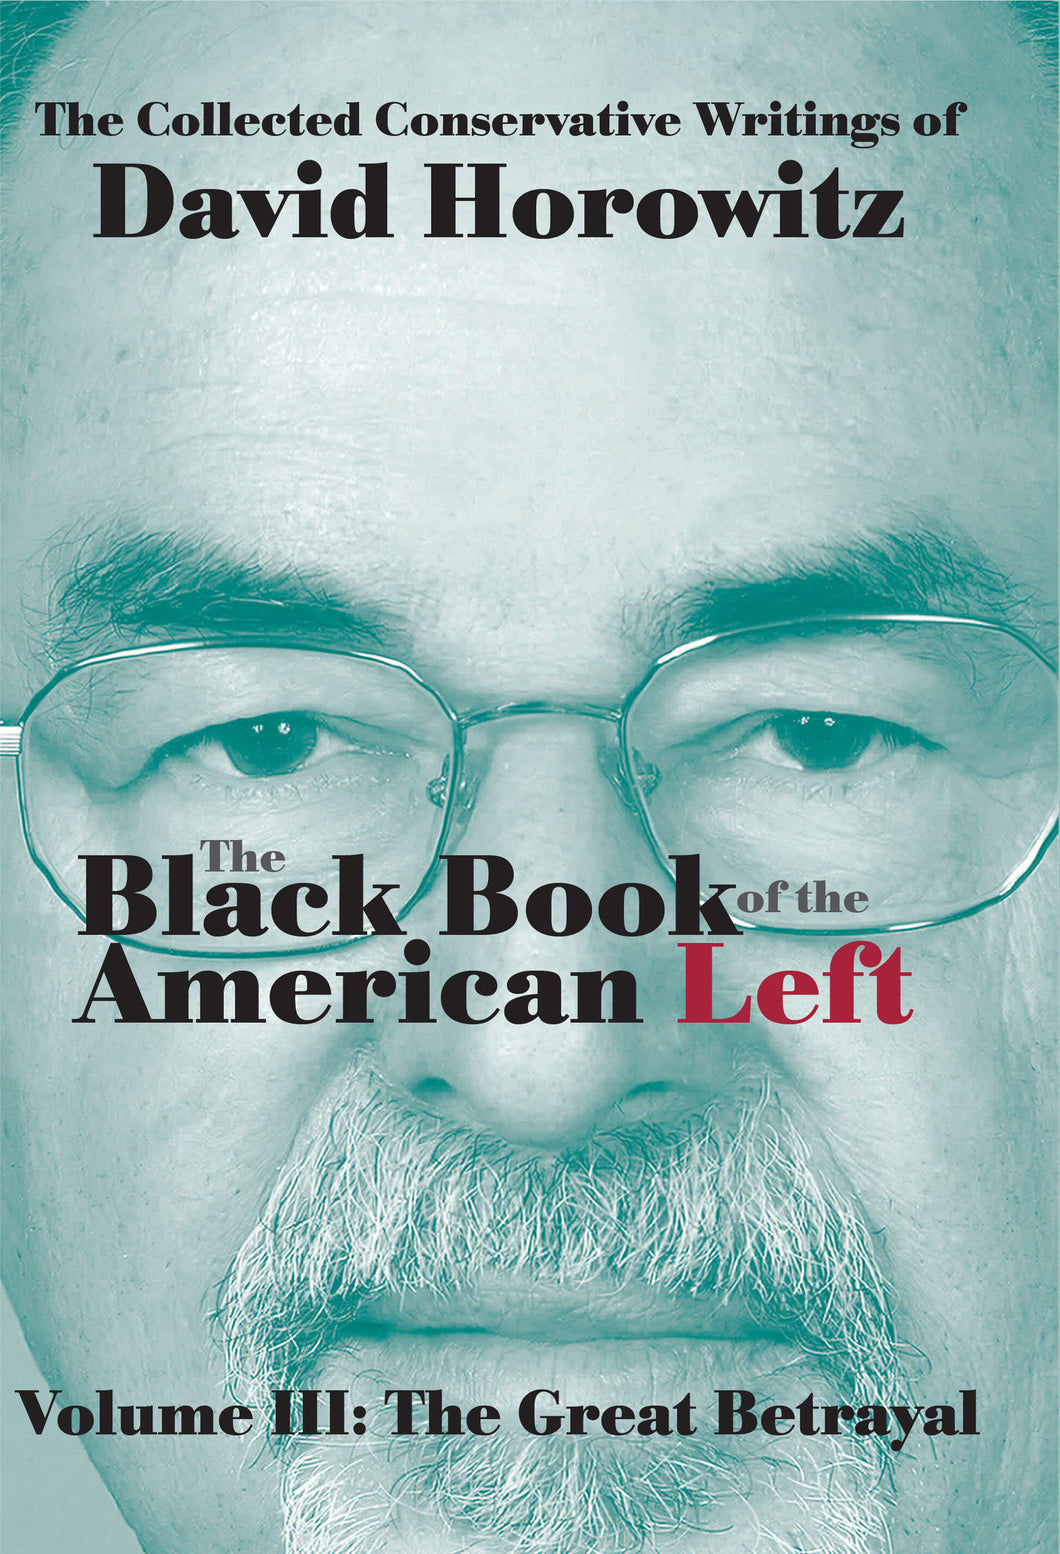 The Black Book of the American Left, Volume III: The Great Betrayal